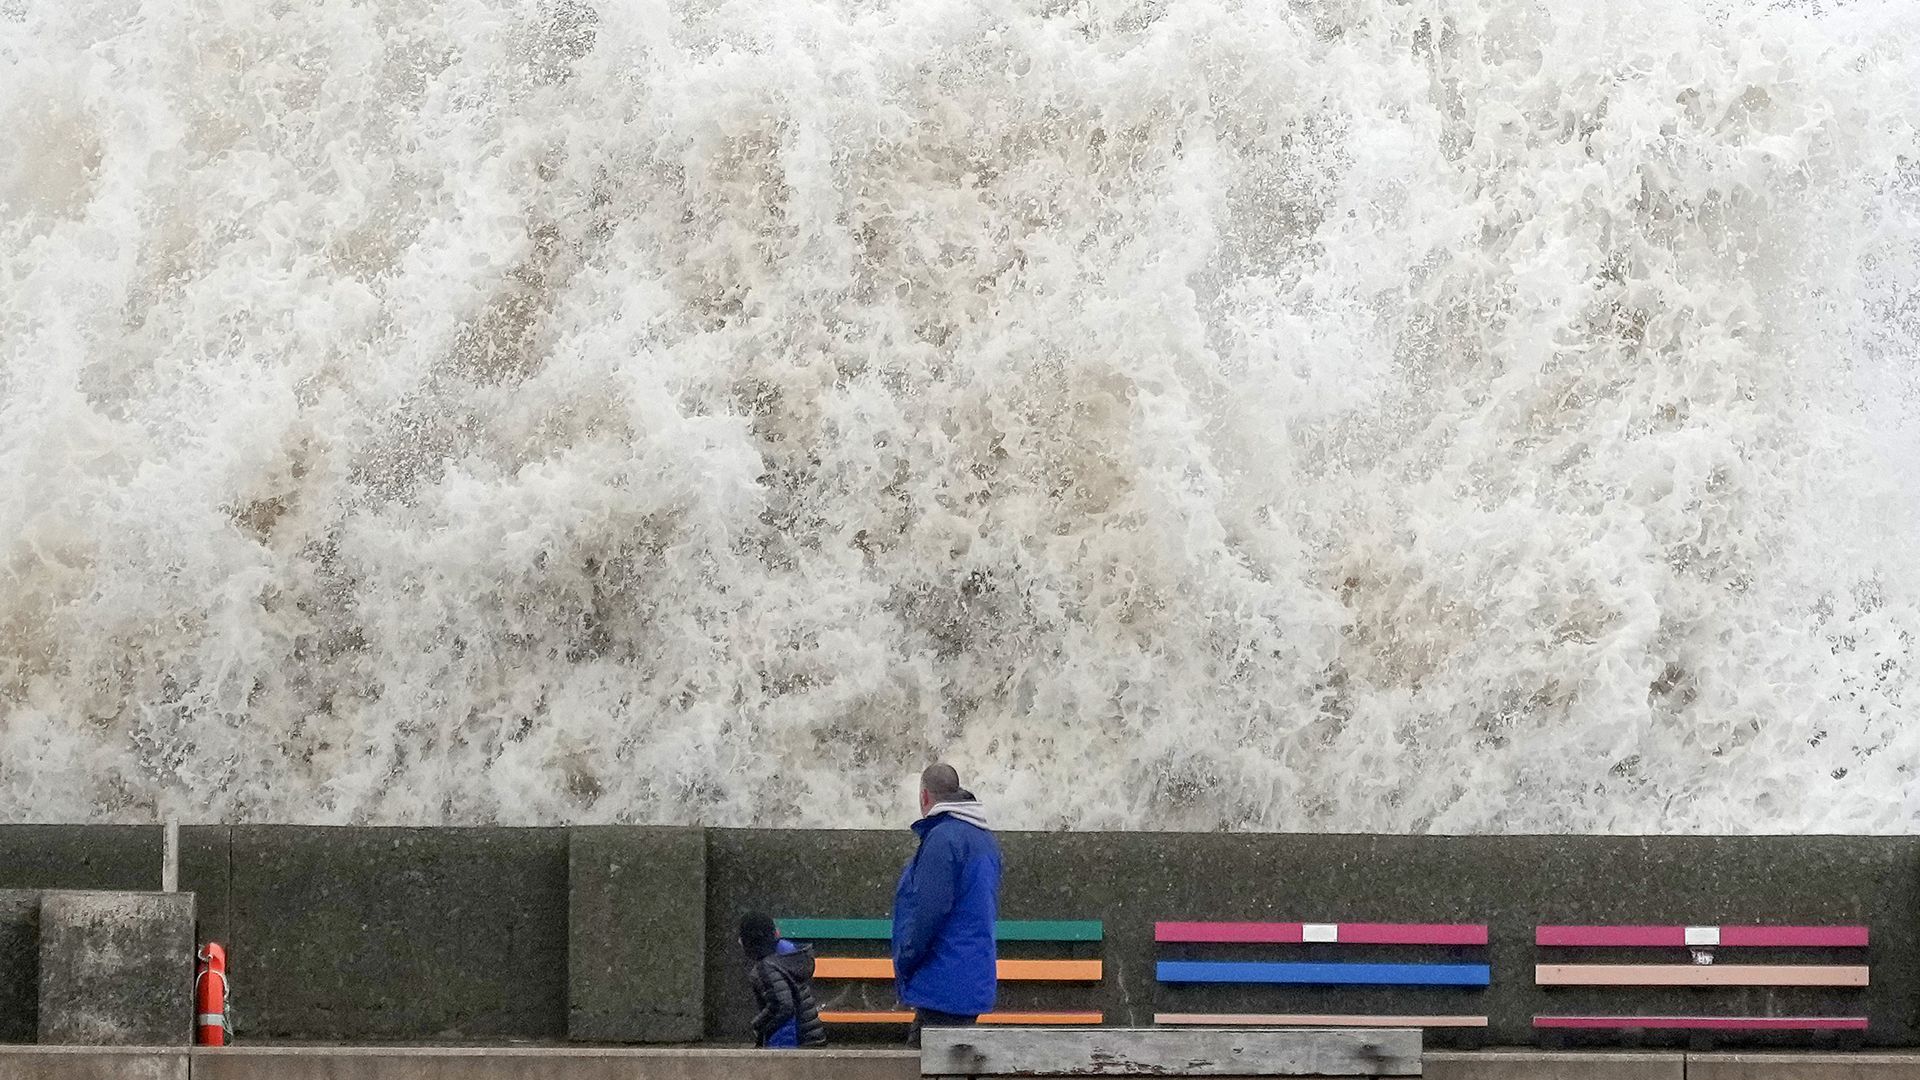 People view the waves created by high winds and spring tides hitting the sea wall at New Brighton promenade on February 17, 2022 in Liverpool, England.